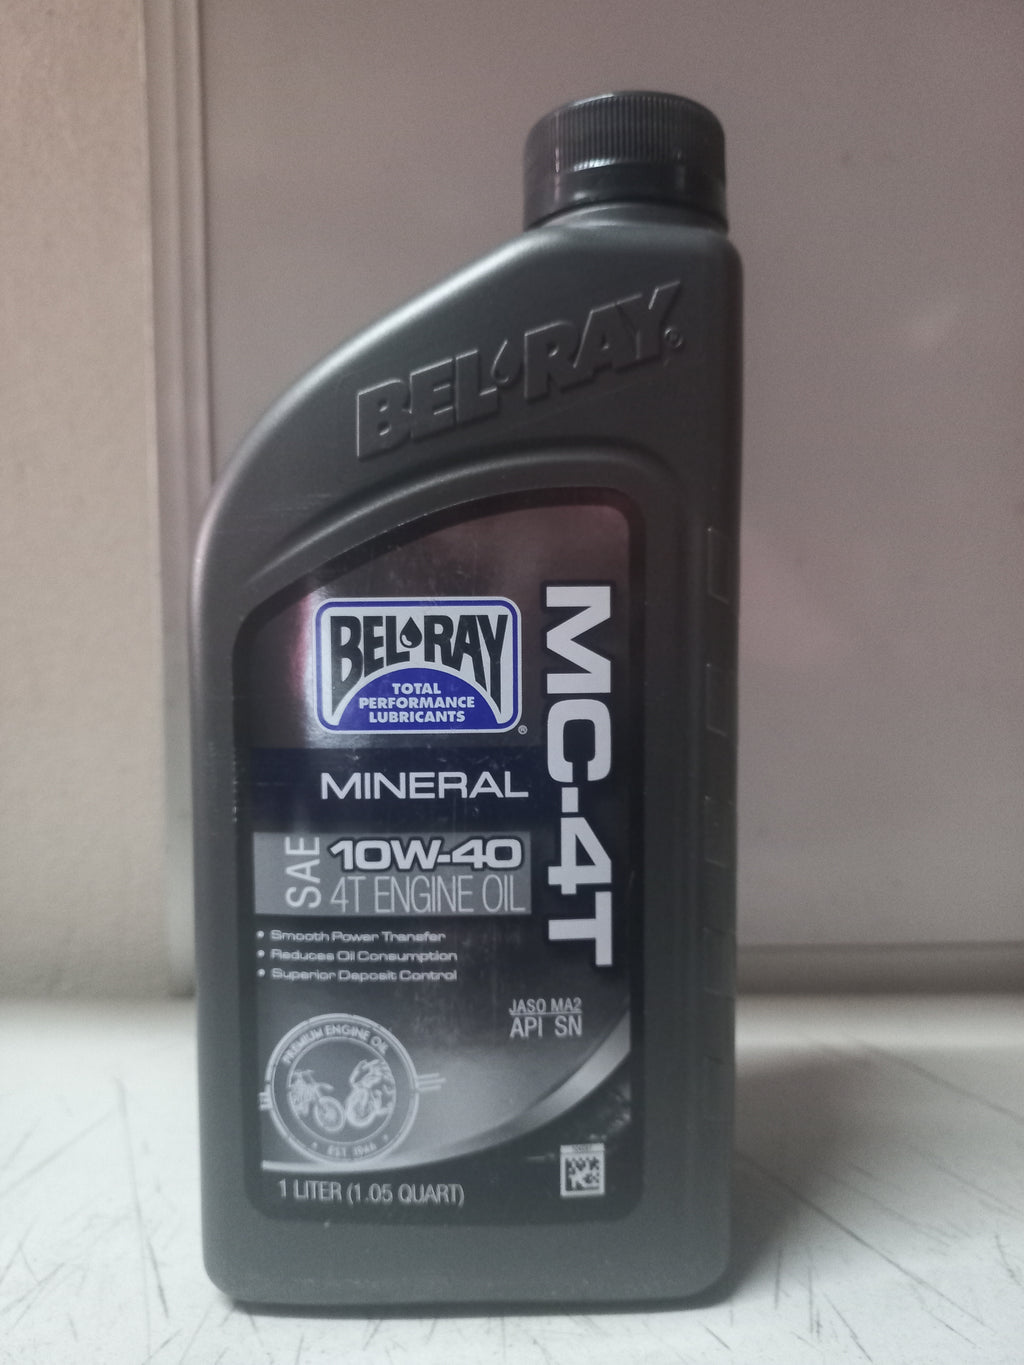 Aceite Bel Ray 10w40 MC-4T Mineral